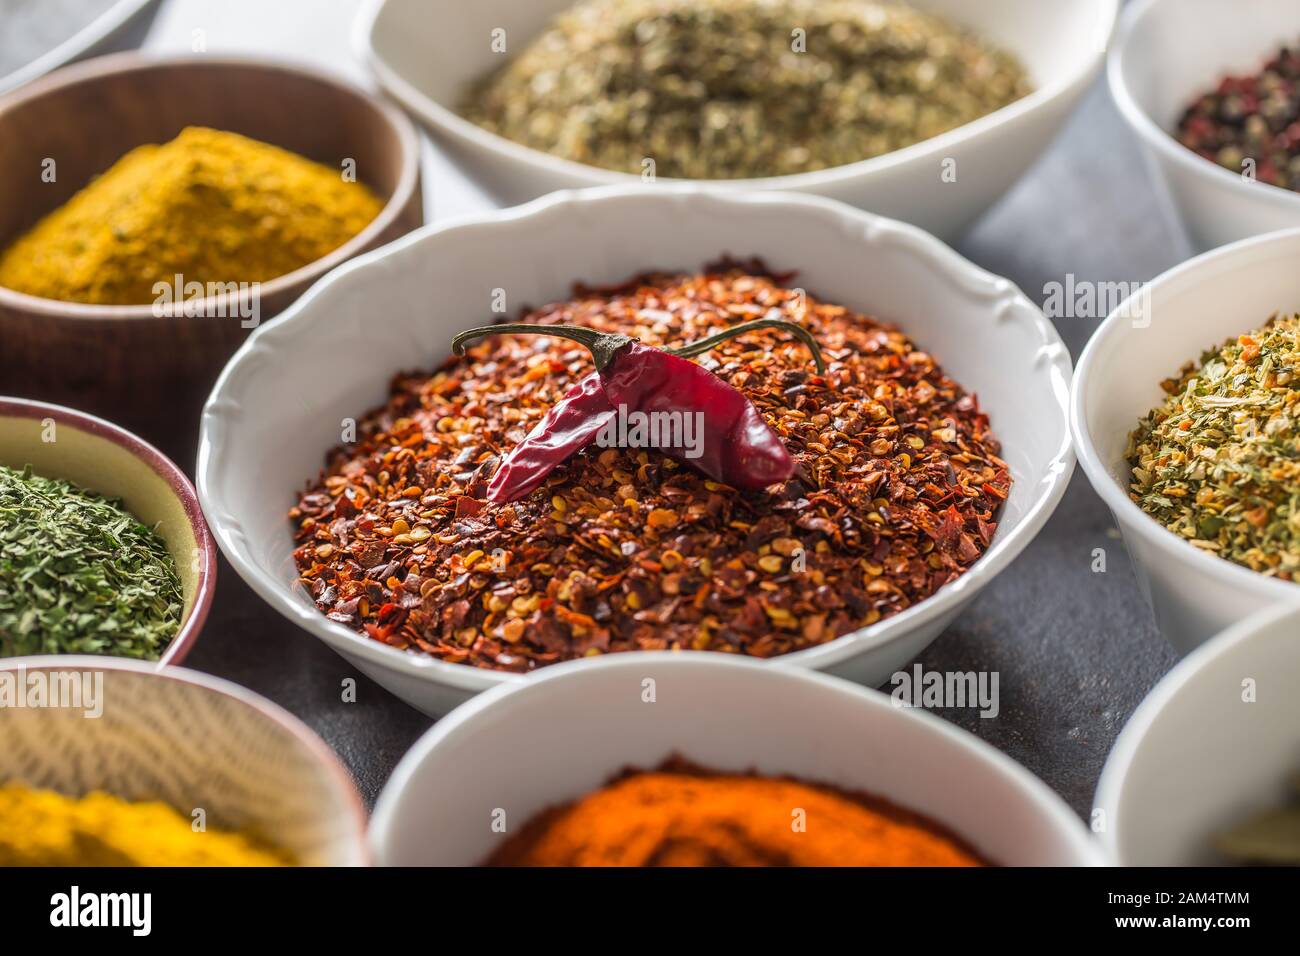 Ground chilli pepper and variety spices and herbs in bowls Stock Photo